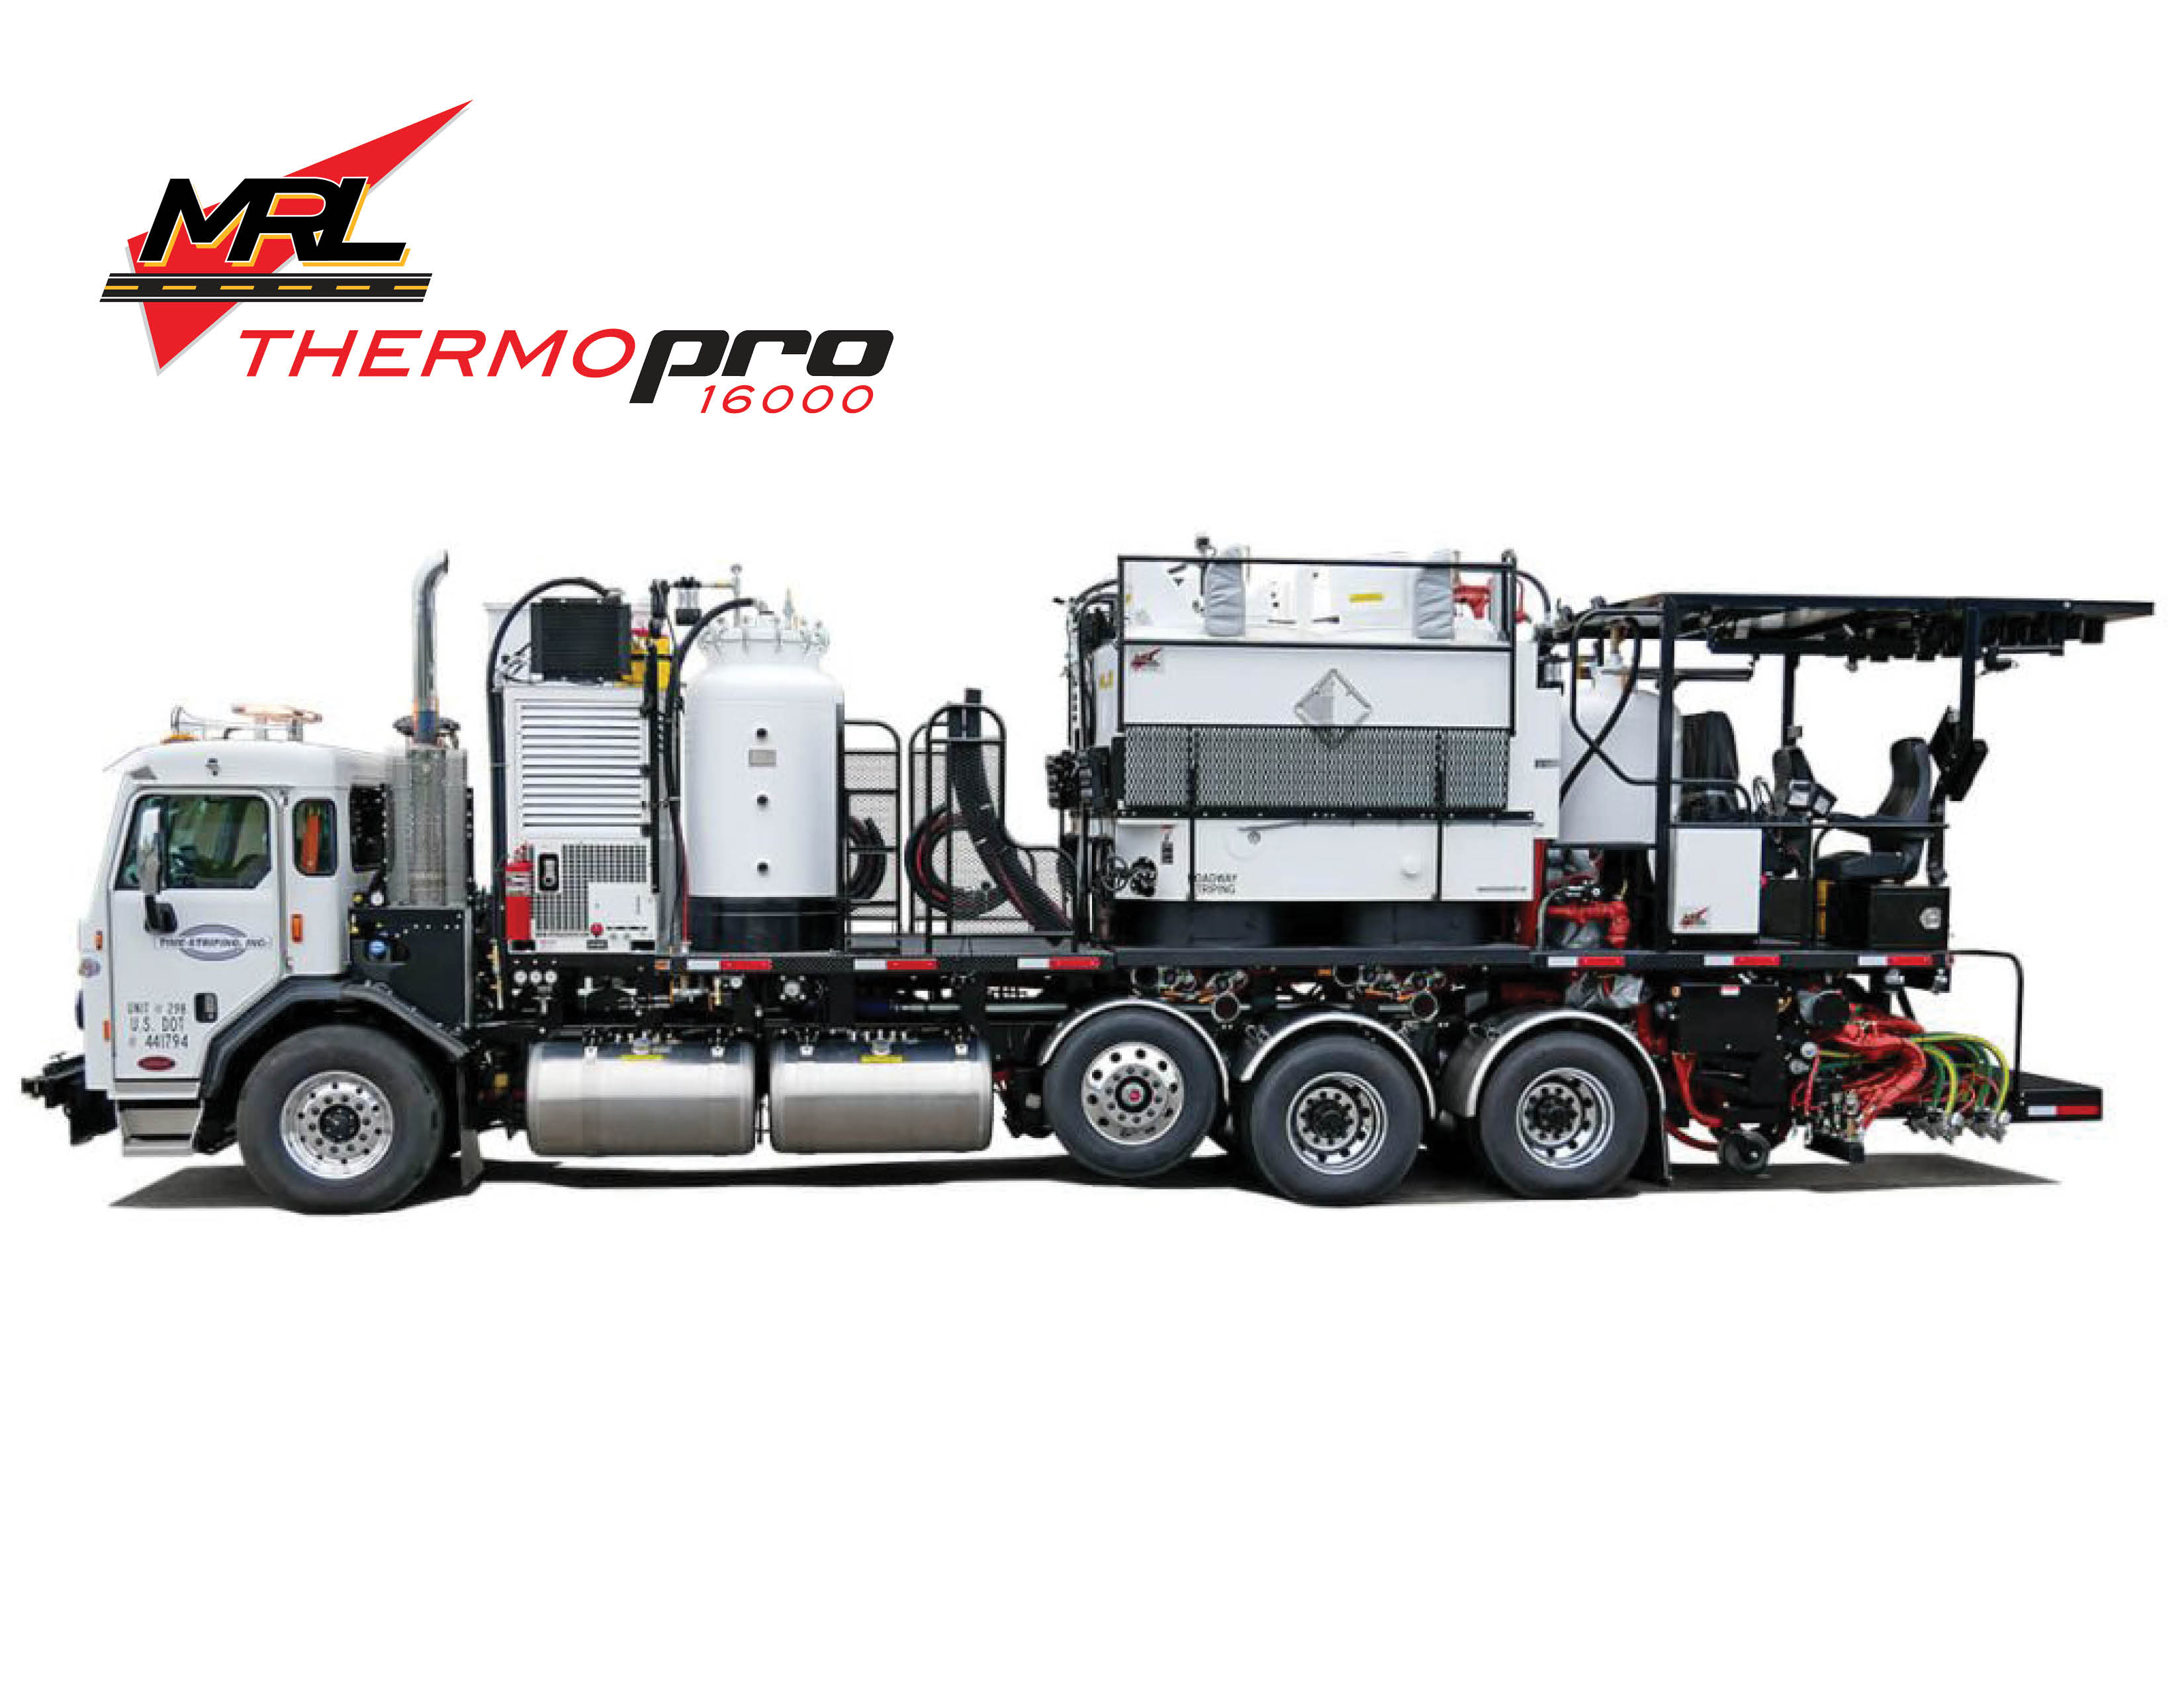 Thermo Pro